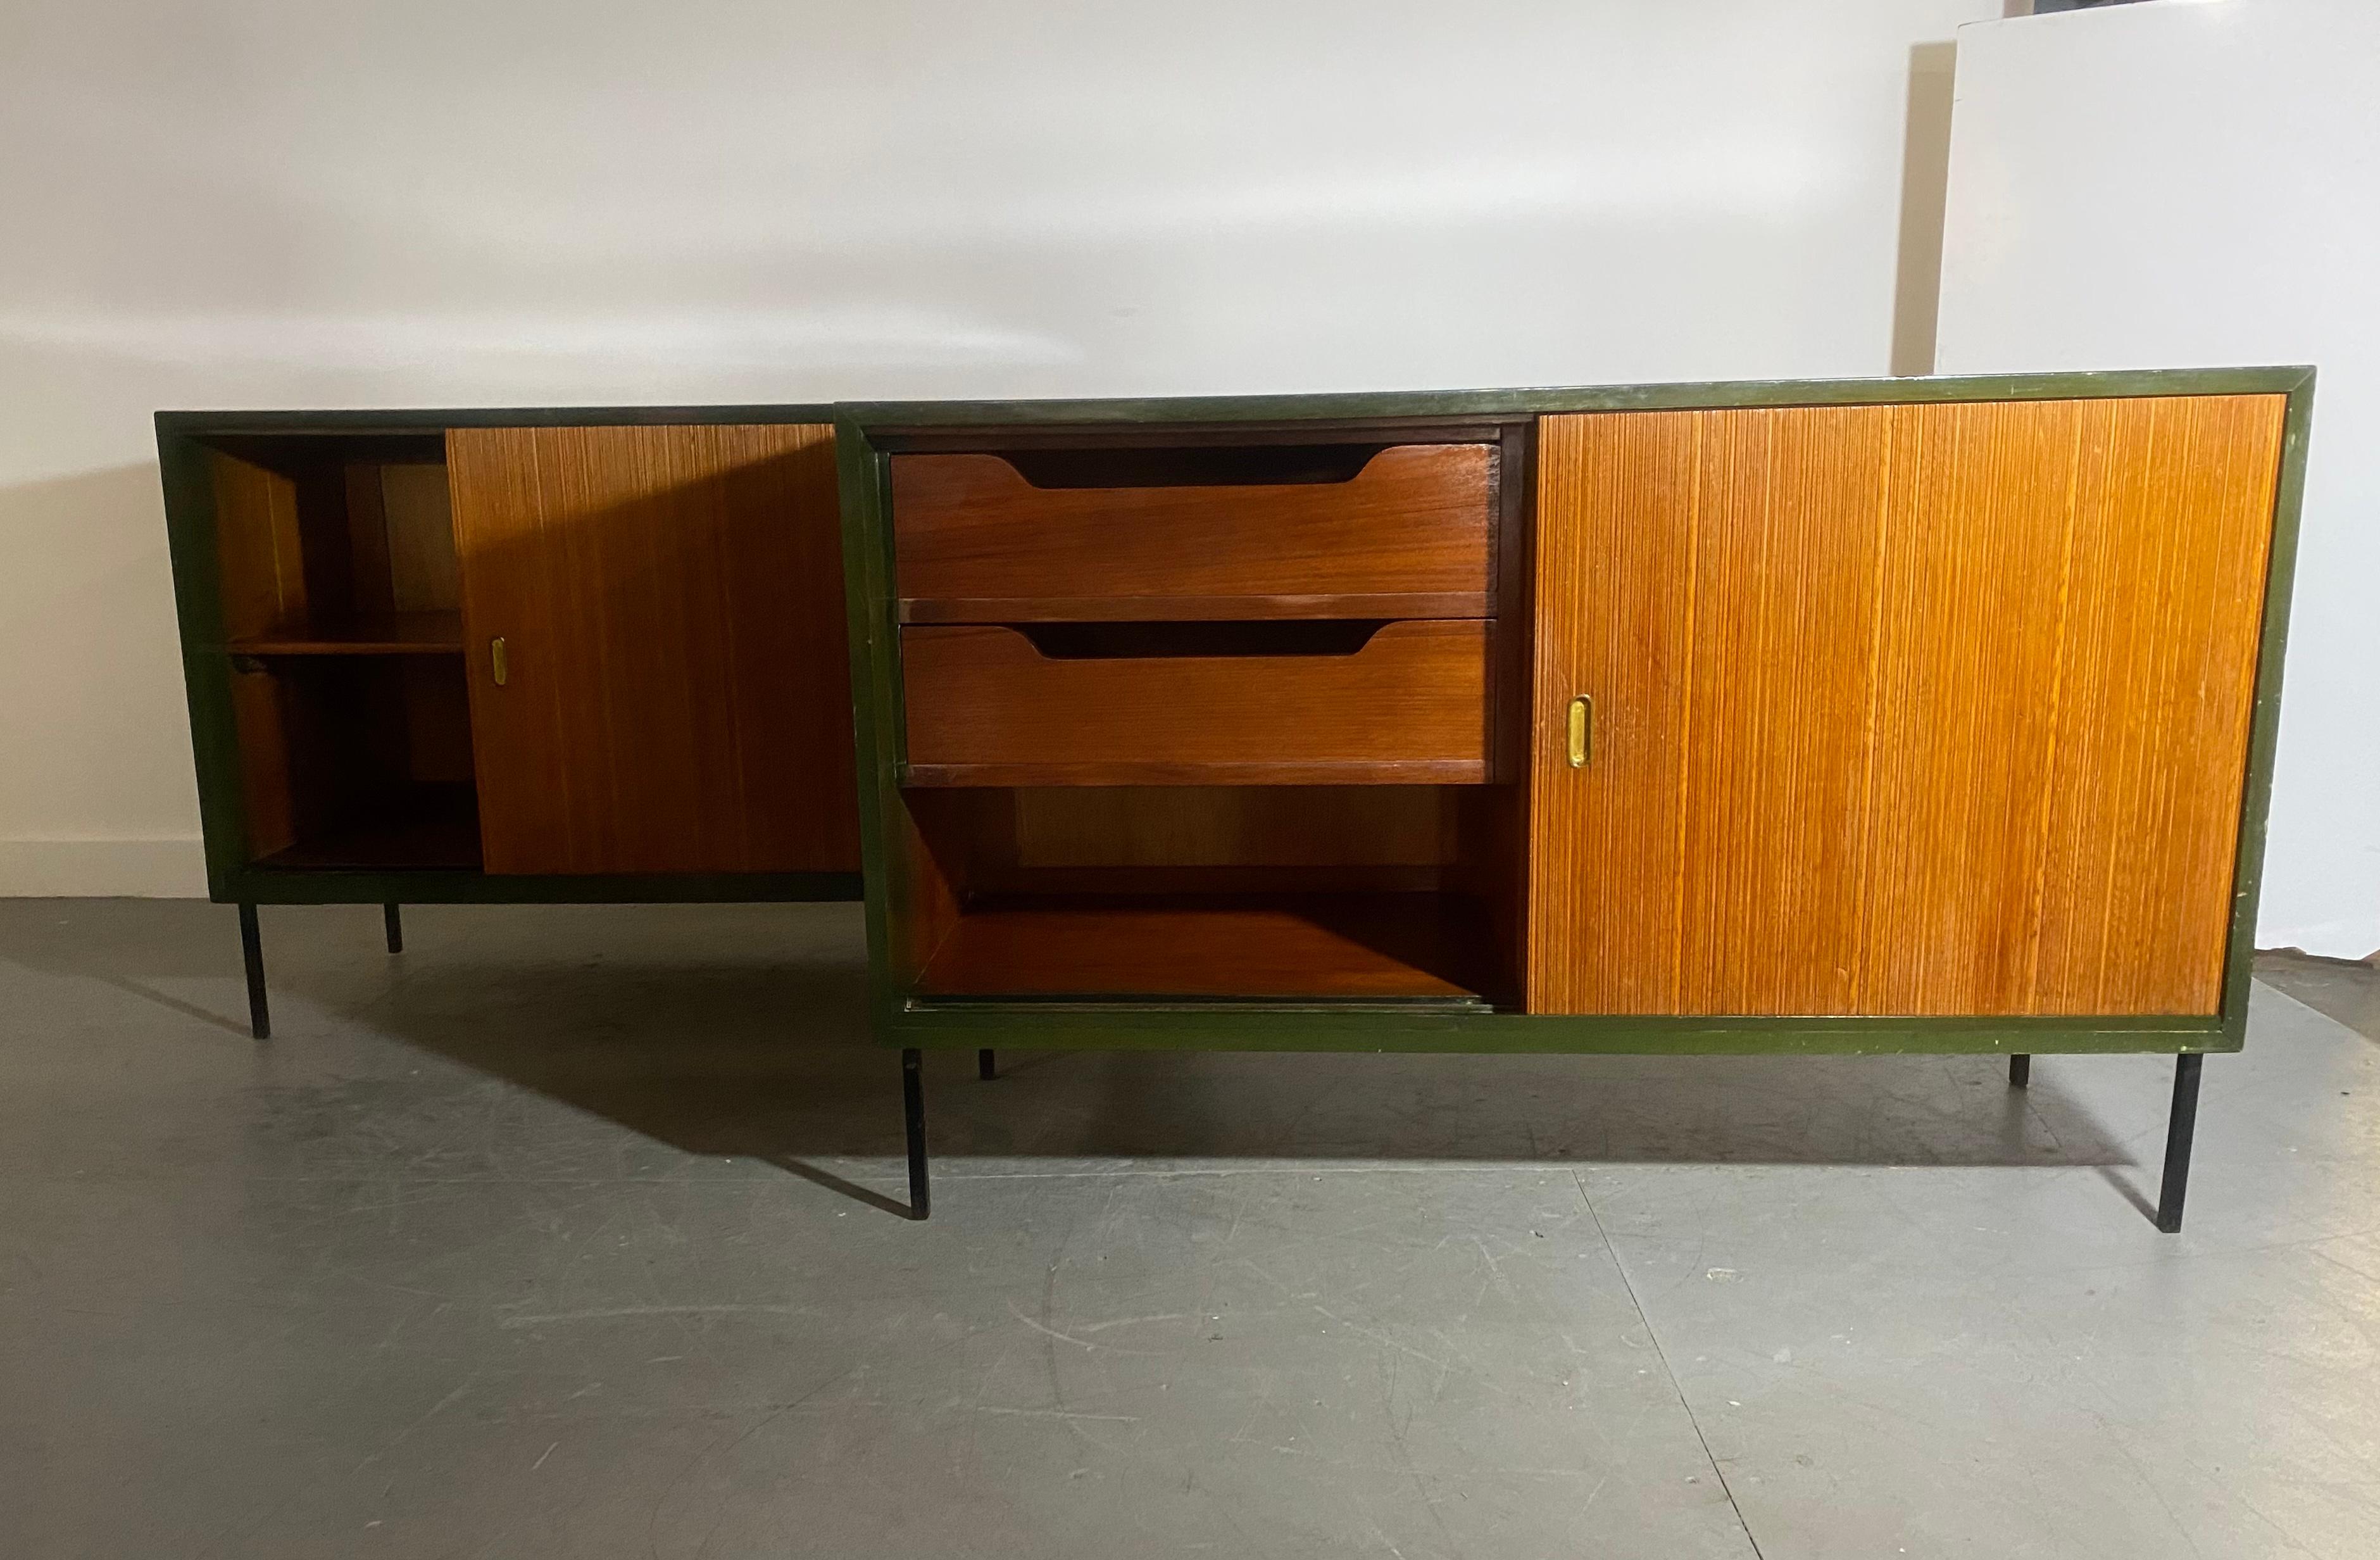 English Interplan Unit 'K' Lacquered Sideboard by Robin Day for Hille, 1950s For Sale